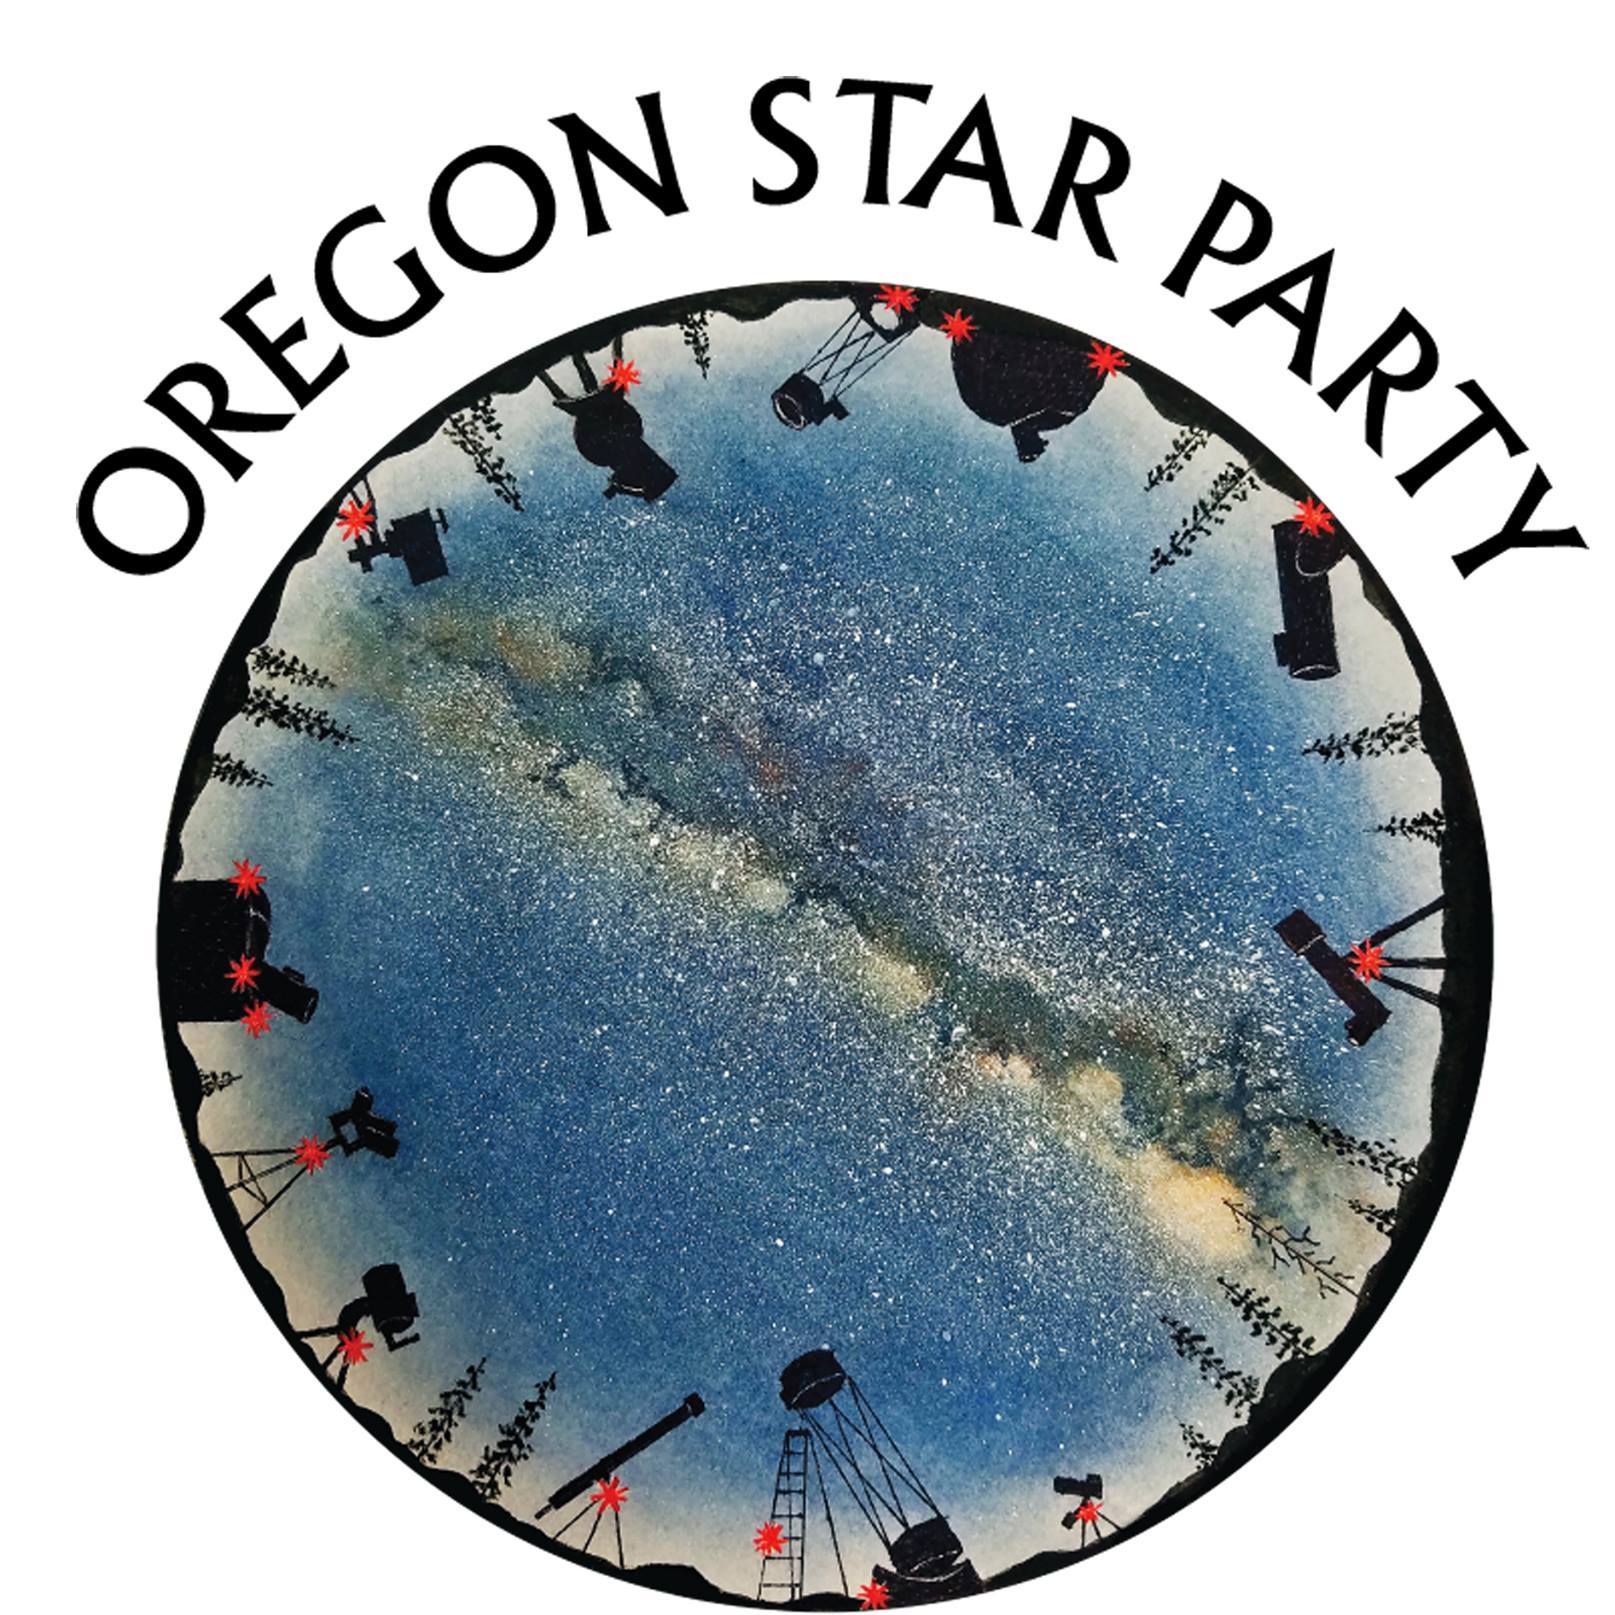 The Oregon Star Party